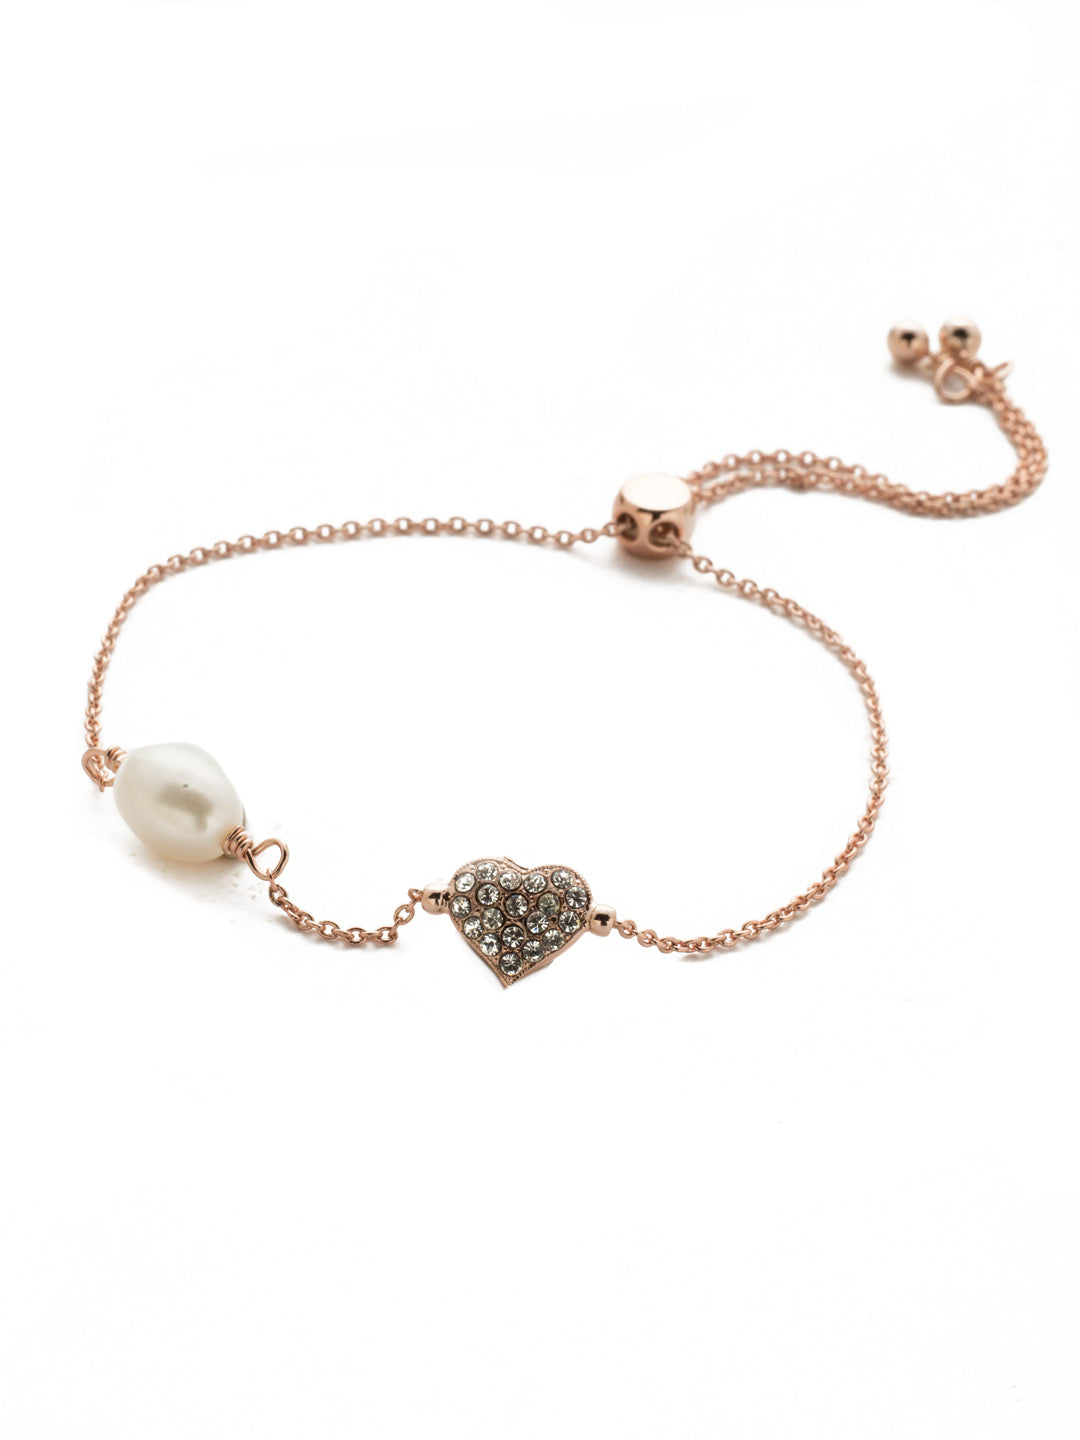 Pippa Slider Bracelet - BEM6RGCRY - <p>A crystal heart, sparking stones, a freshwater pearl, what more could a girl want around her wrist? This one is the way to her - or your - heart. (Ladies, it's okay - treat yourself!) From Sorrelli's Crystal collection in our Rose Gold-tone finish.</p>